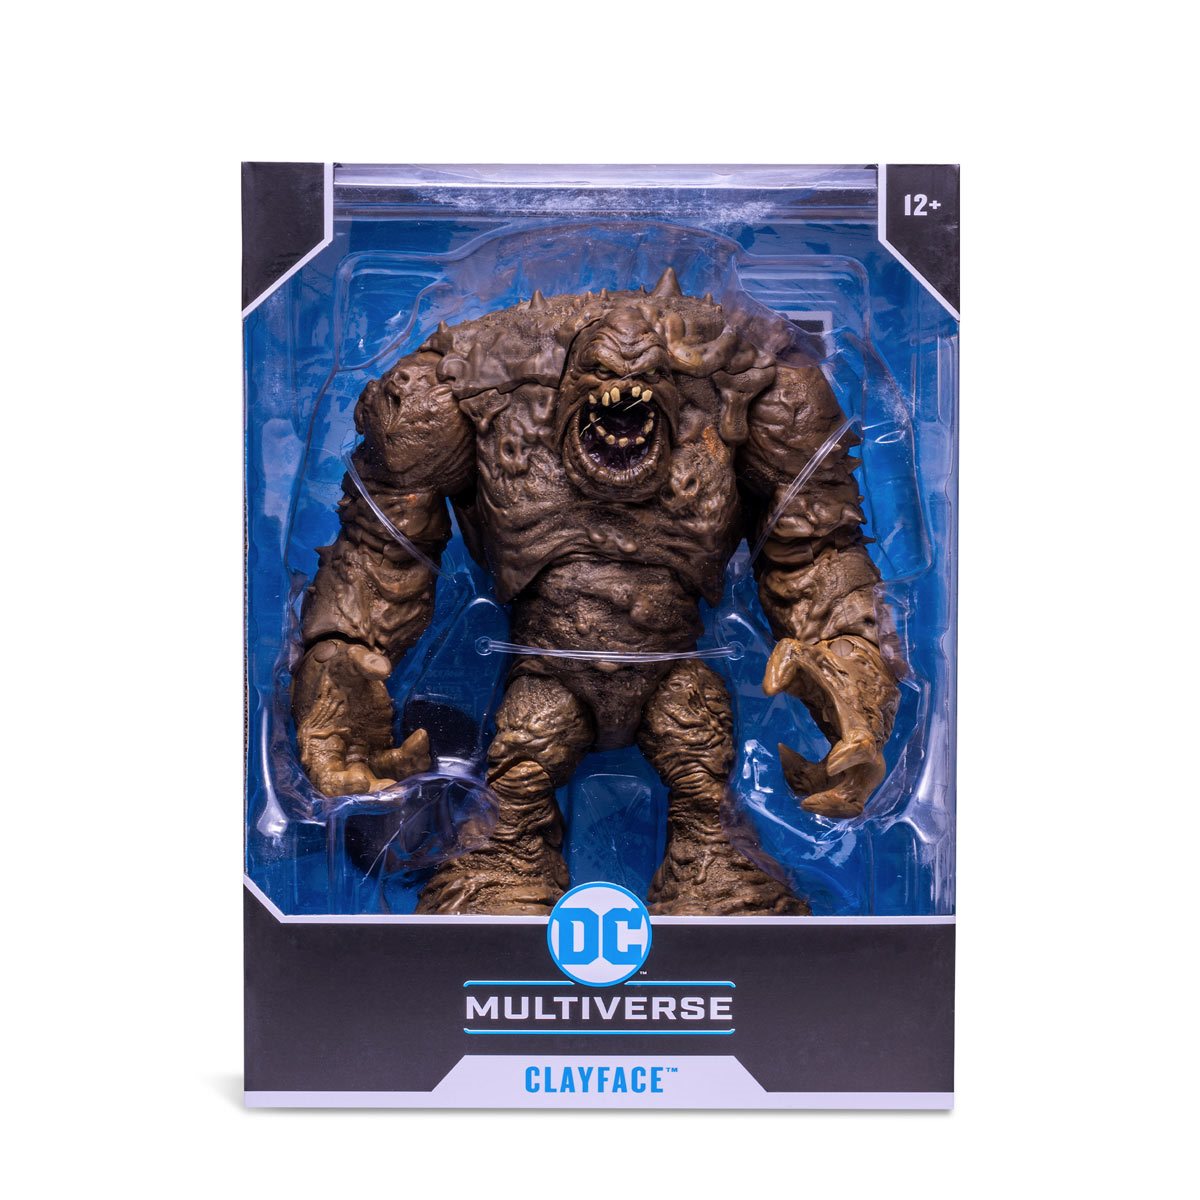 DC Collector Megafig Wave 1 Clayface Action Figure